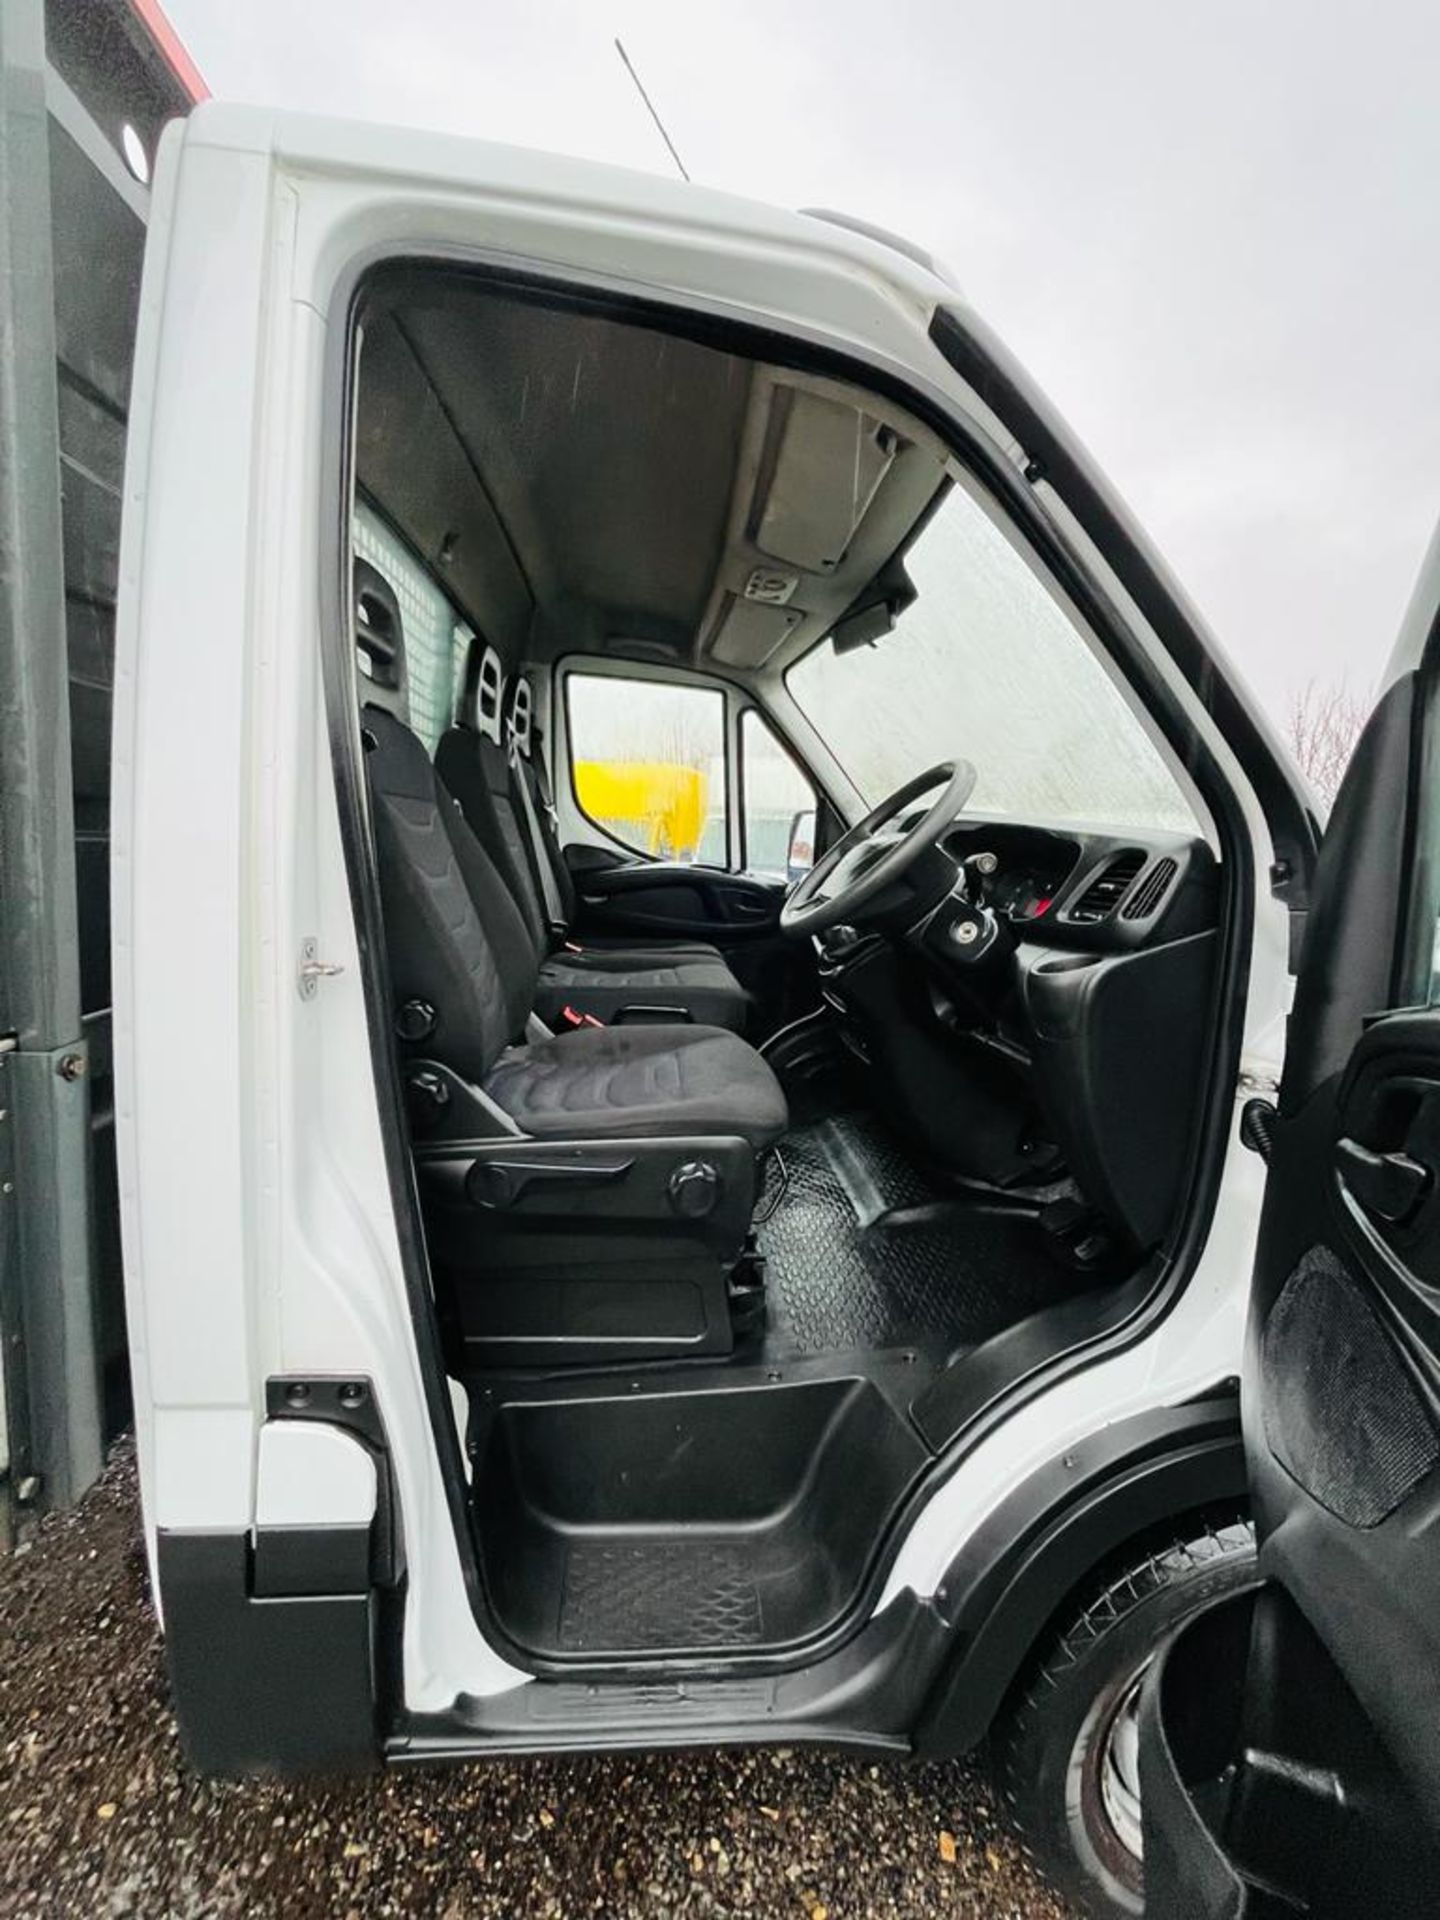 ** ON SALE **Iveco Daily 35C14 2.3 HPI 2018 '68 Reg' Alloy Dropside - ULEZ Compliant - Image 11 of 20